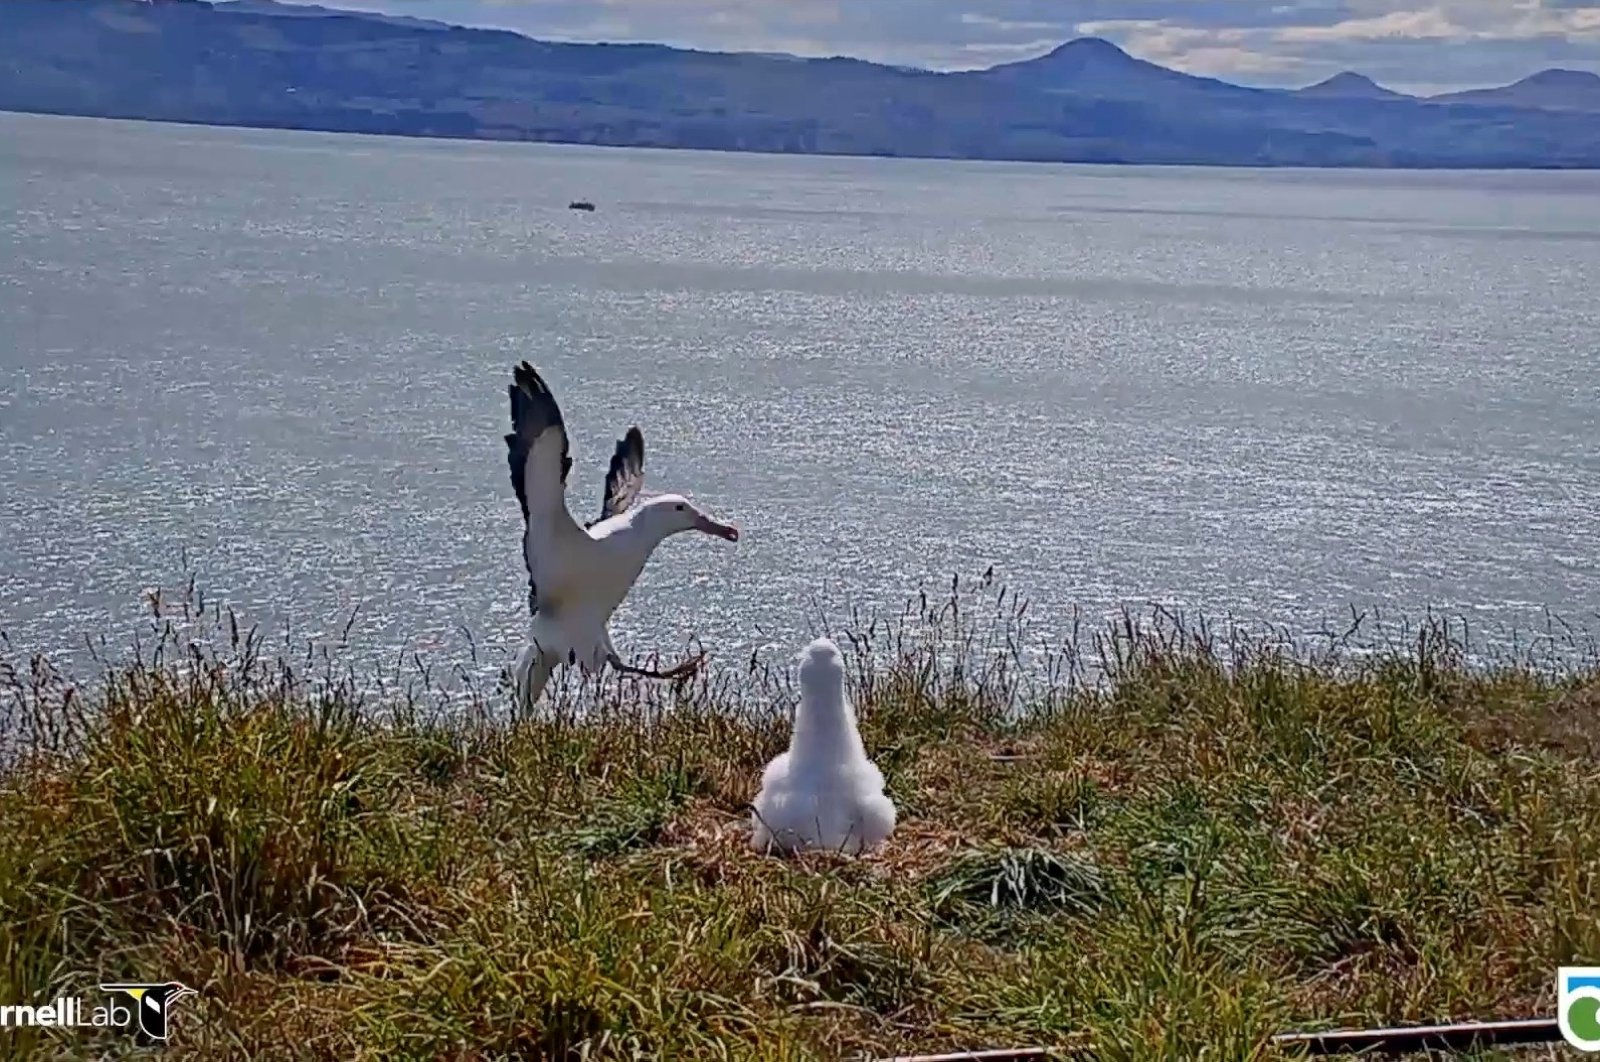 An albatross falls over while attempting to land at Taiaroa Head Nature Reserve, as a chick looks on, South Island, New Zealand, March 6, 2021. (New Zealand DOC via Reuters)